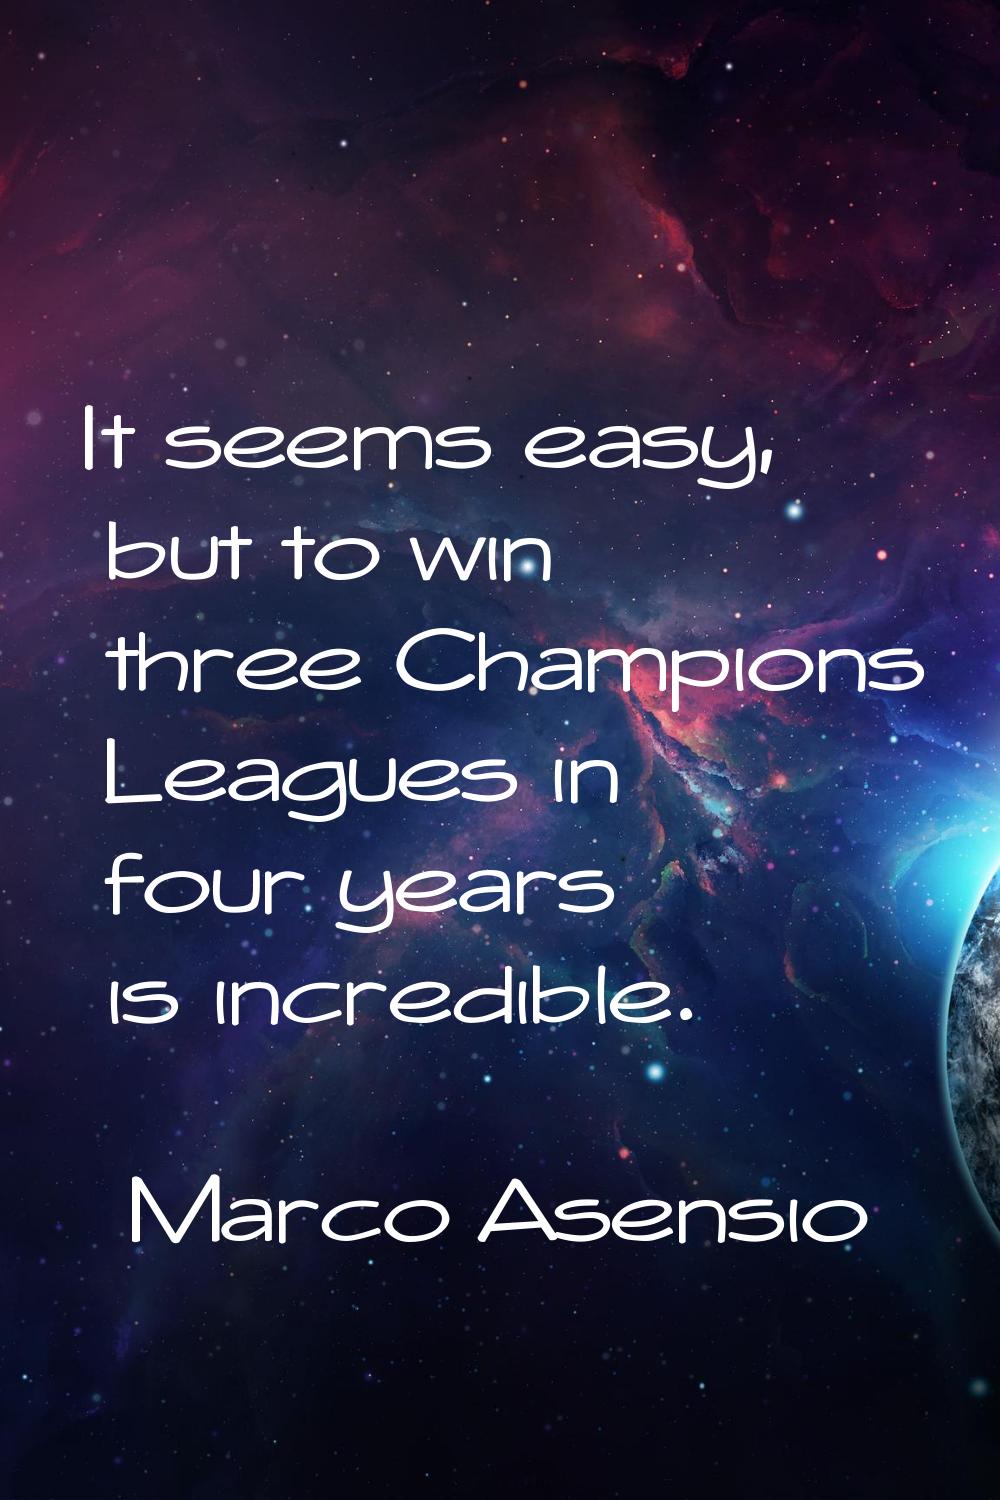 It seems easy, but to win three Champions Leagues in four years is incredible.